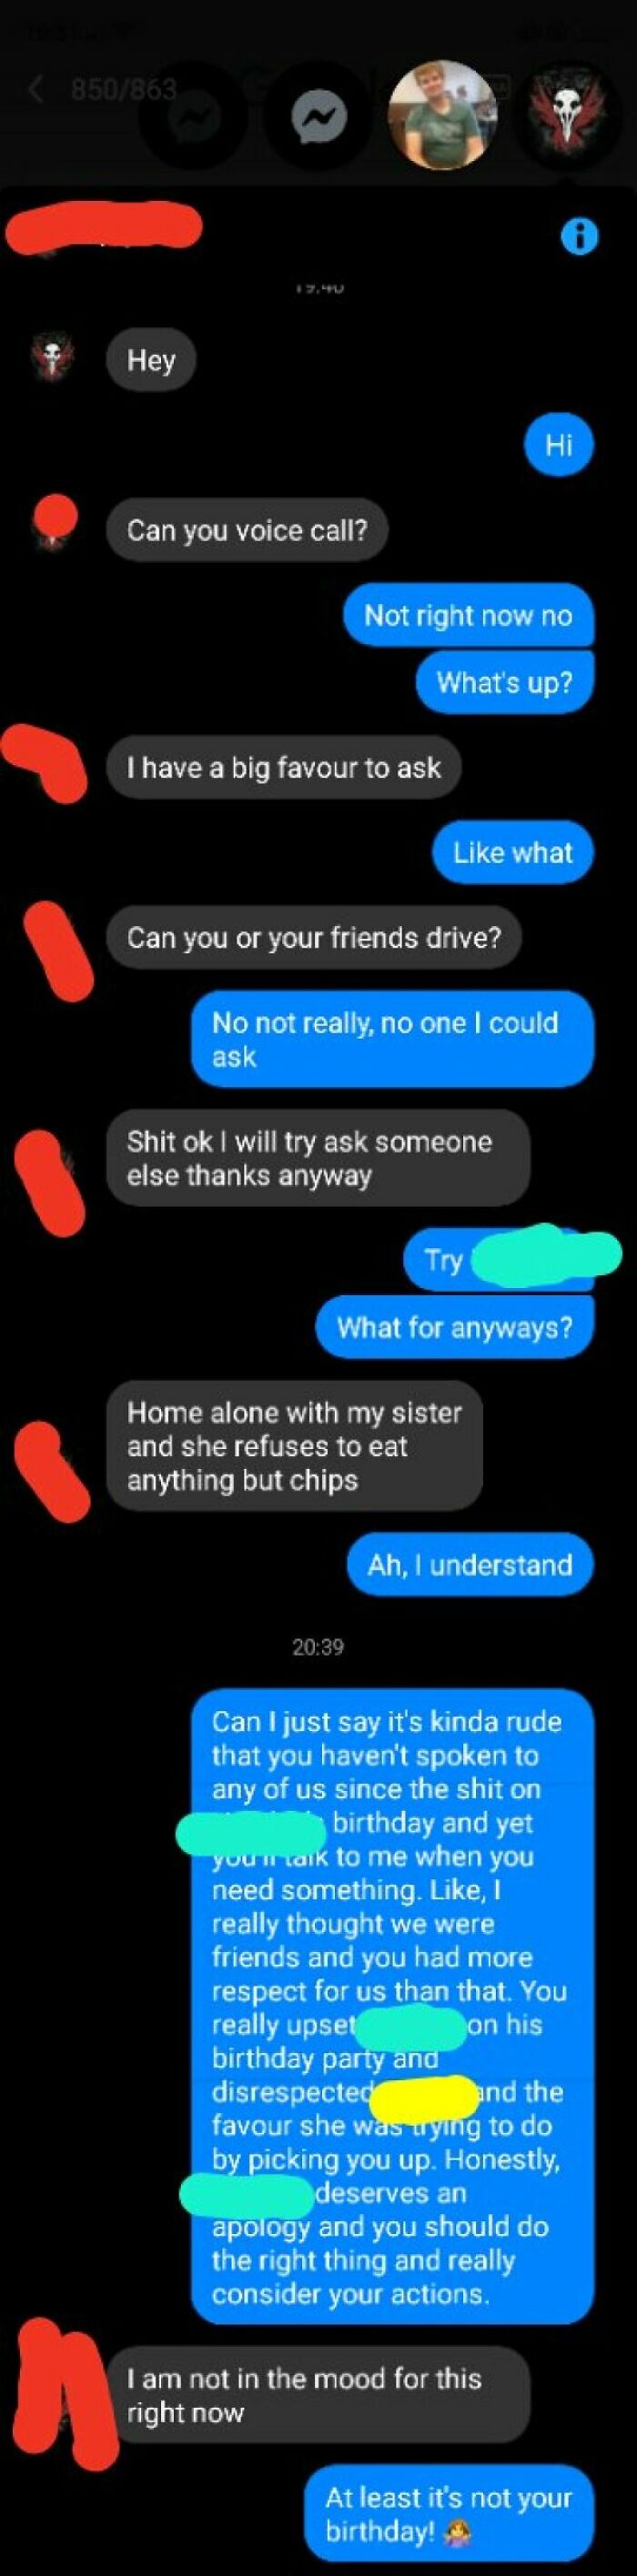 Last Heard From This Guy (19) Nine Months Ago, When He Called My Best Friend (Green, 19m) A C**t On His Birthday Because Another Friend Was Late Picking Him Up For The Party